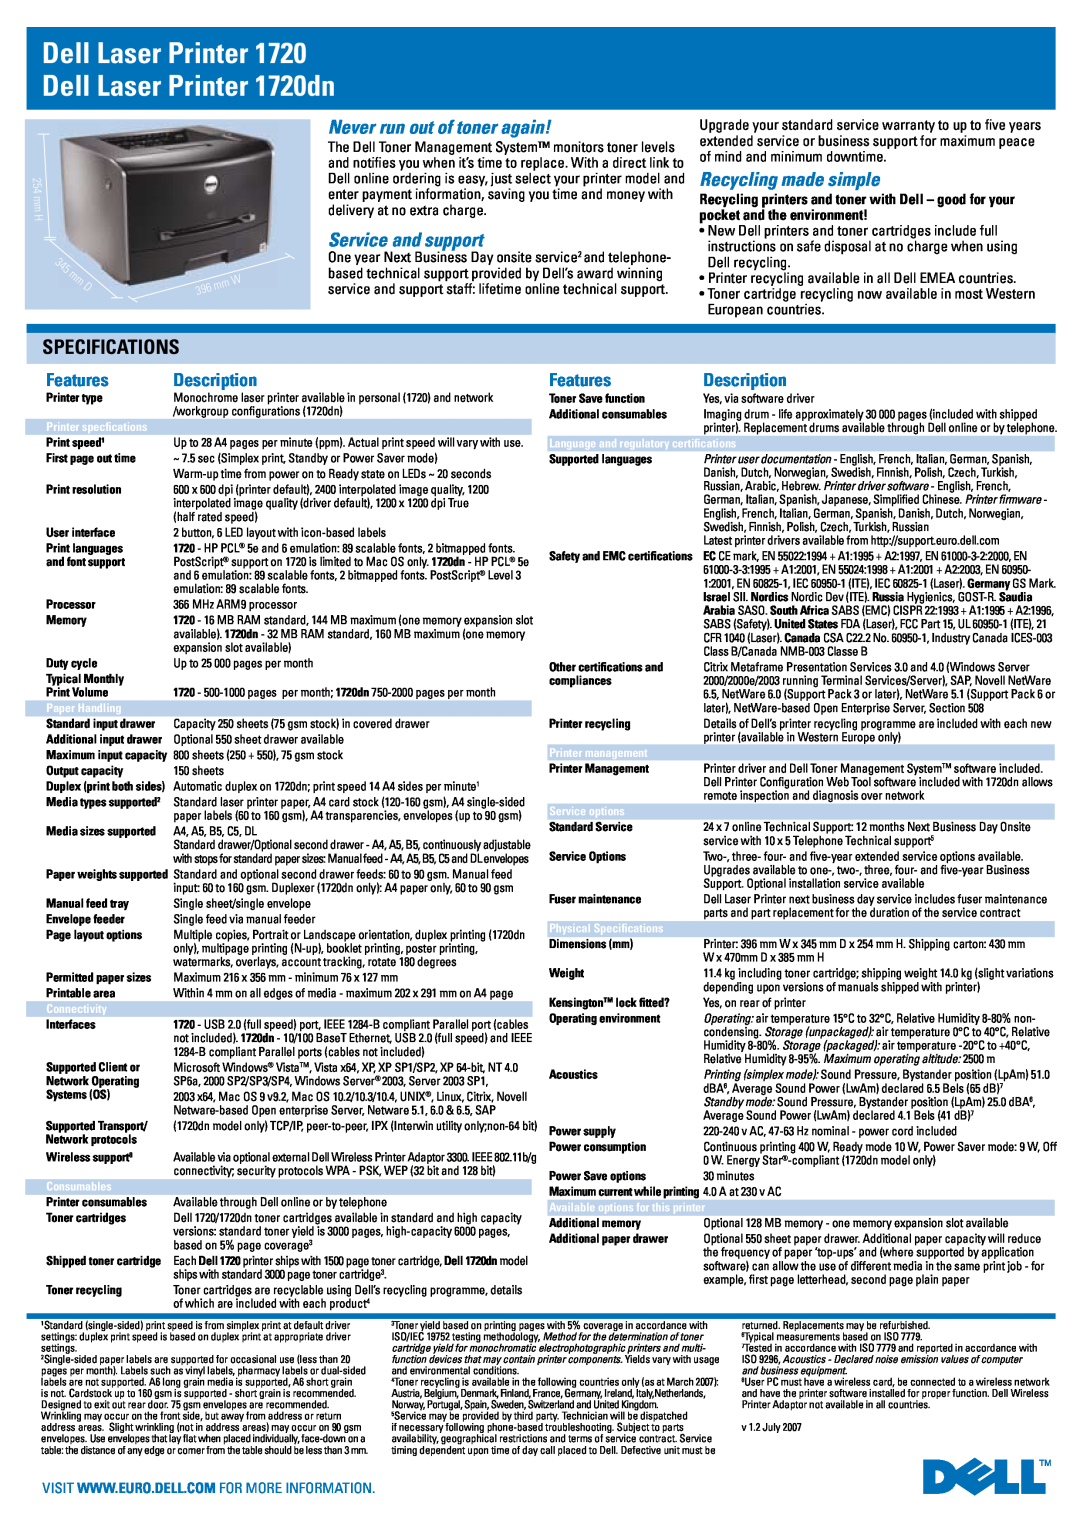 Dell Specifications, Dell Laser Printer 1720 Dell Laser Printer 1720dn, Never run out of toner again, Features, mm D 